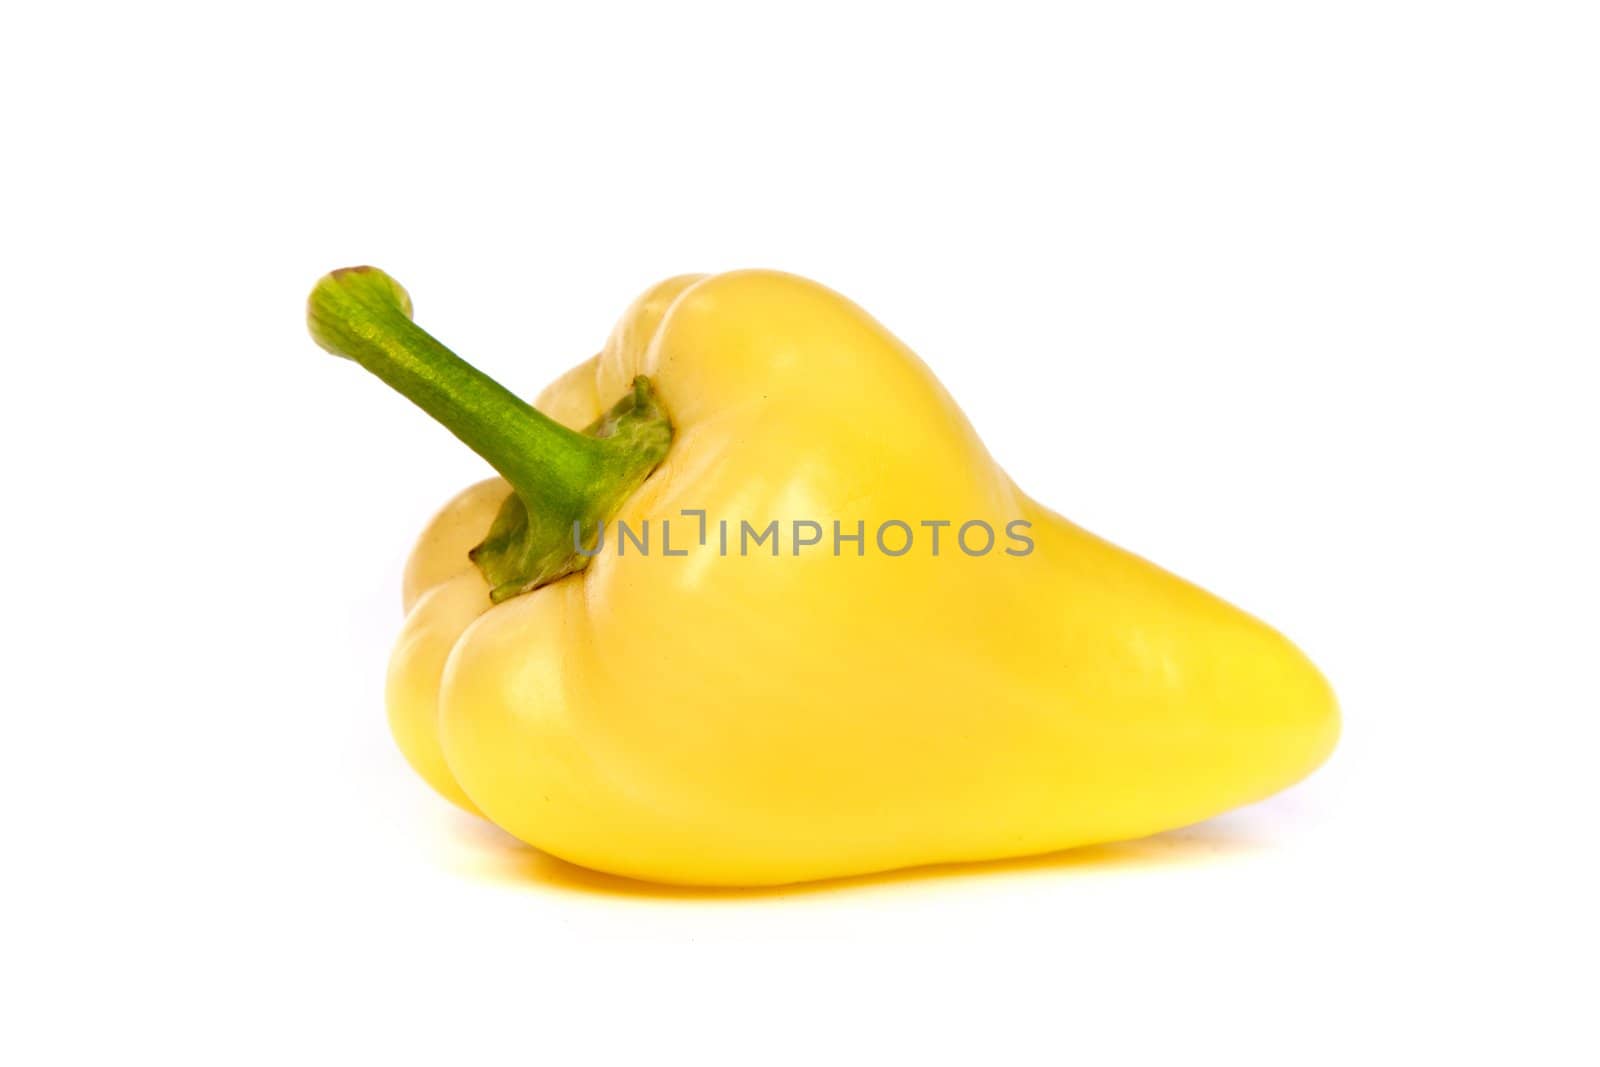 A yellow bell pepper isolated on plain white background.